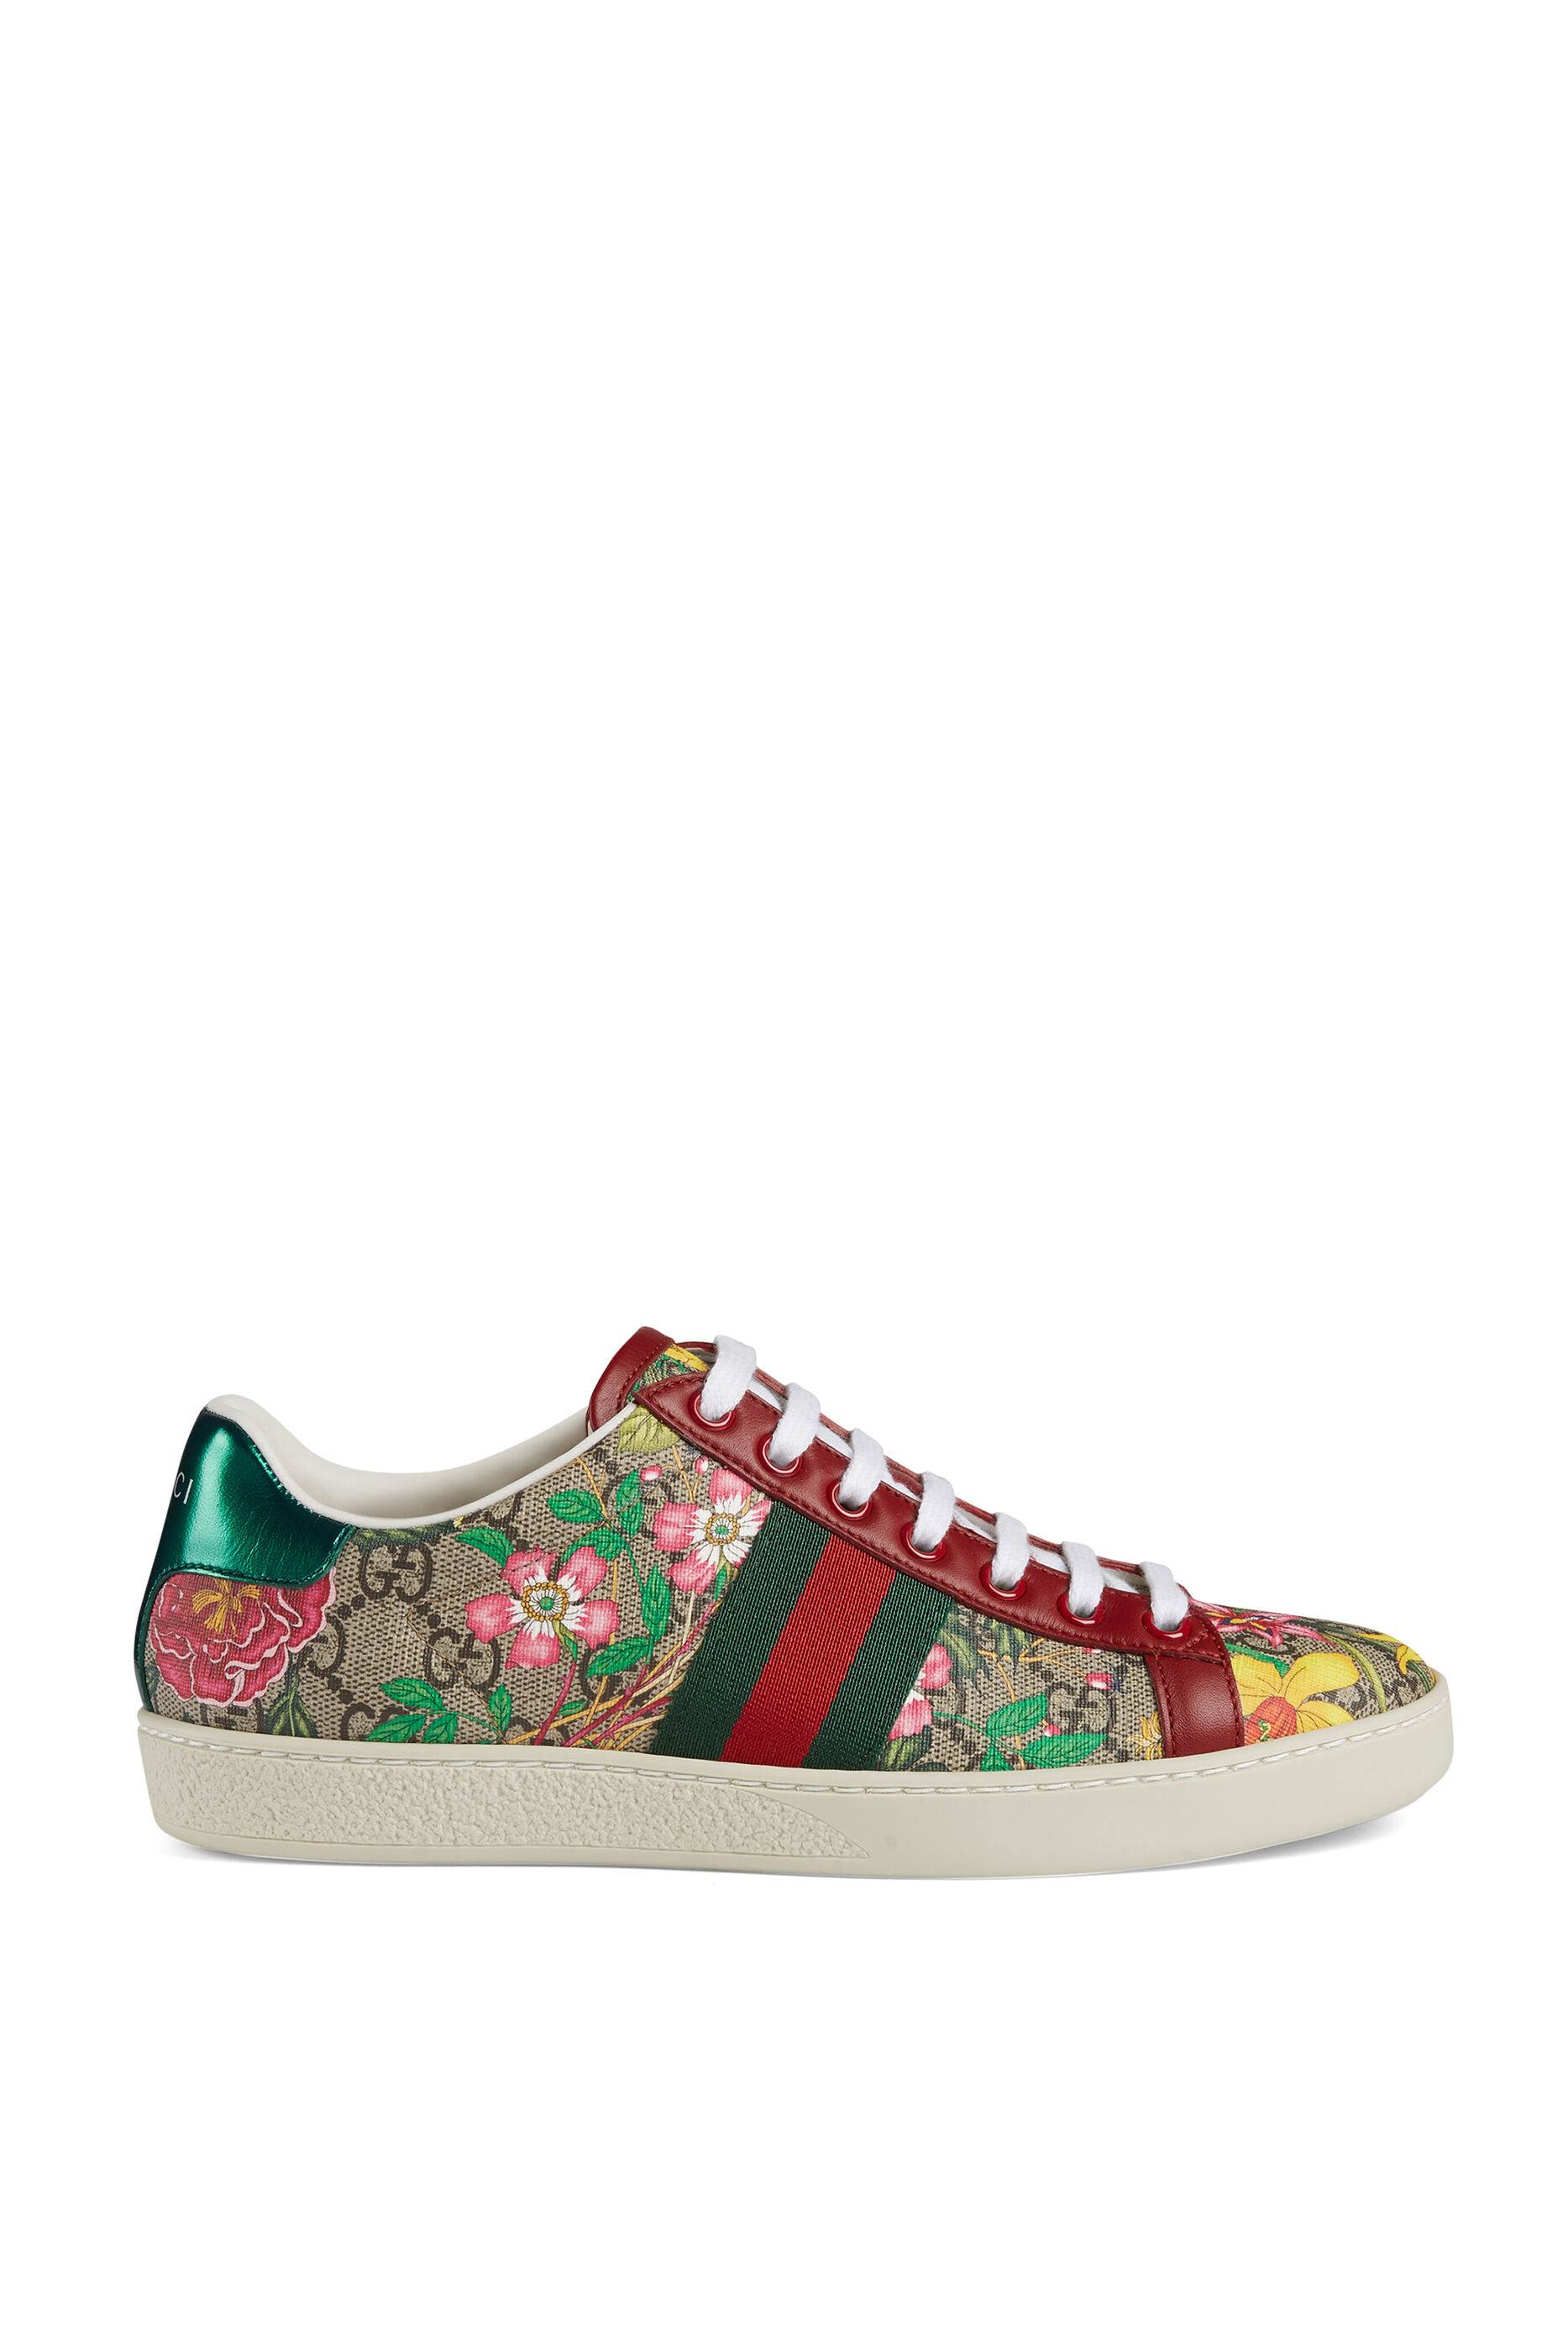 Gucci Ace GG Floral Sneakers - Womens 